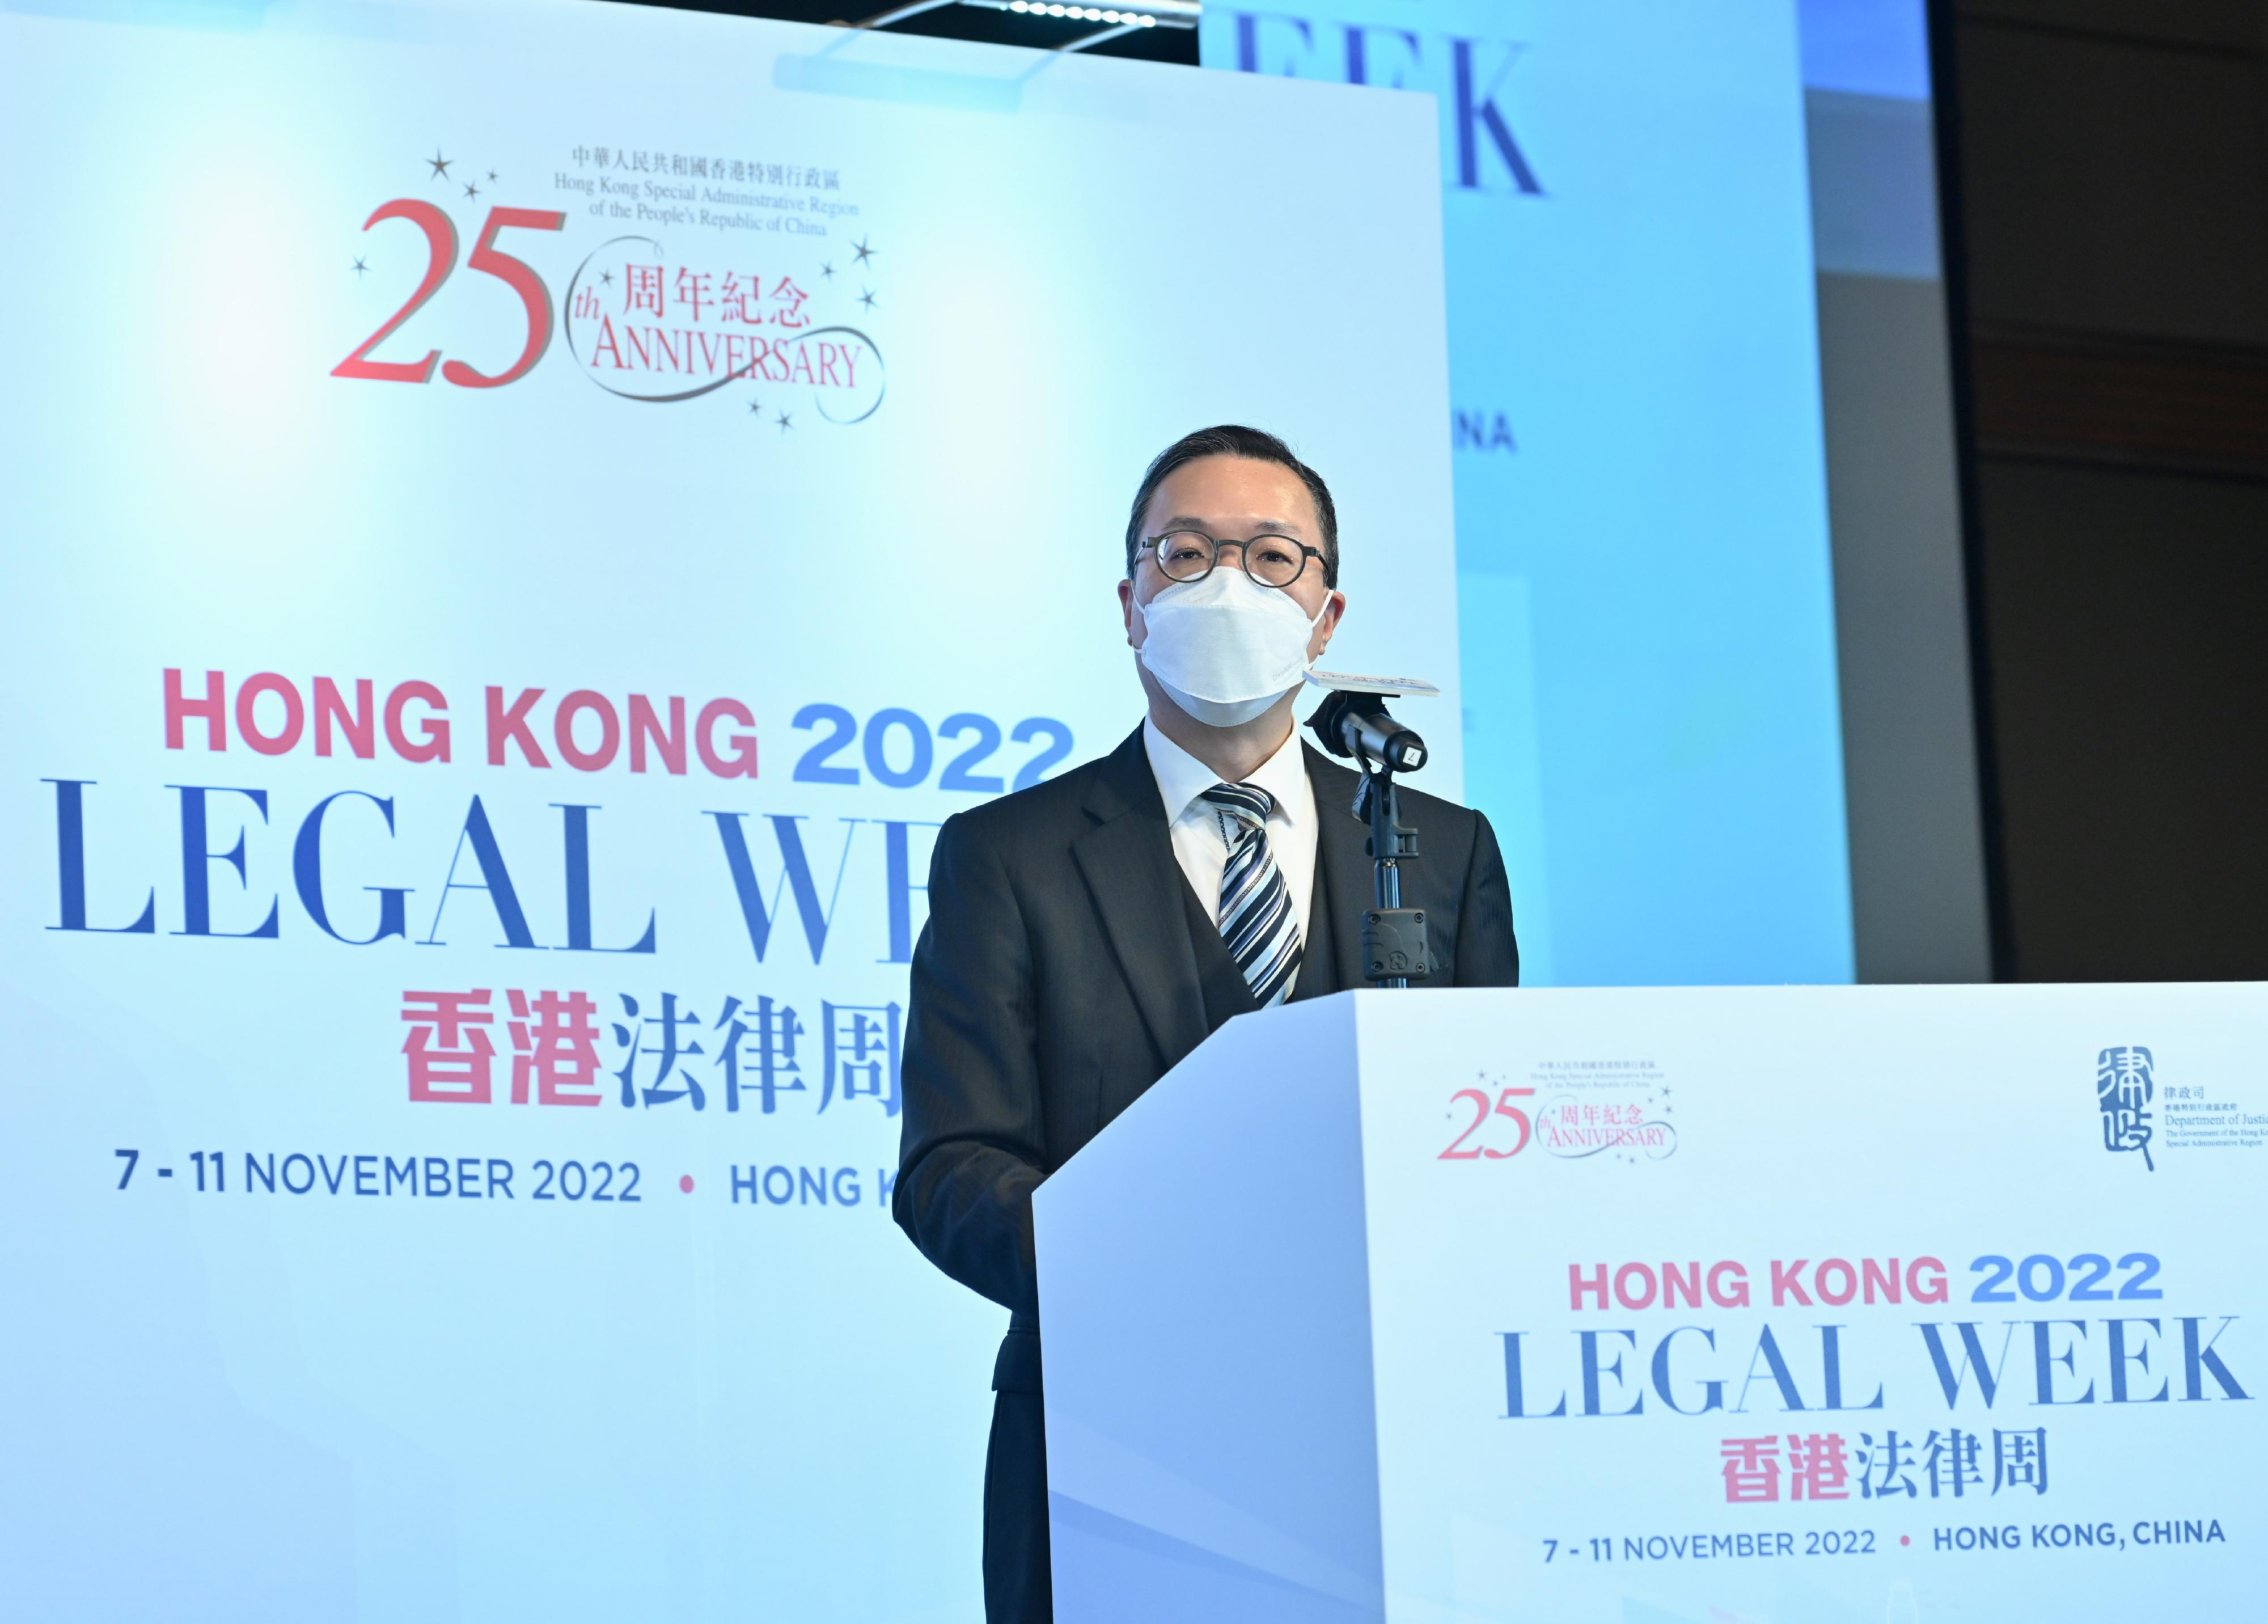 The Secretary for Justice, Mr Paul Lam, SC, delivers closing remarks at the Asia-Pacific Private International Law Summit under the Hong Kong Legal Week 2022 today (November 7).